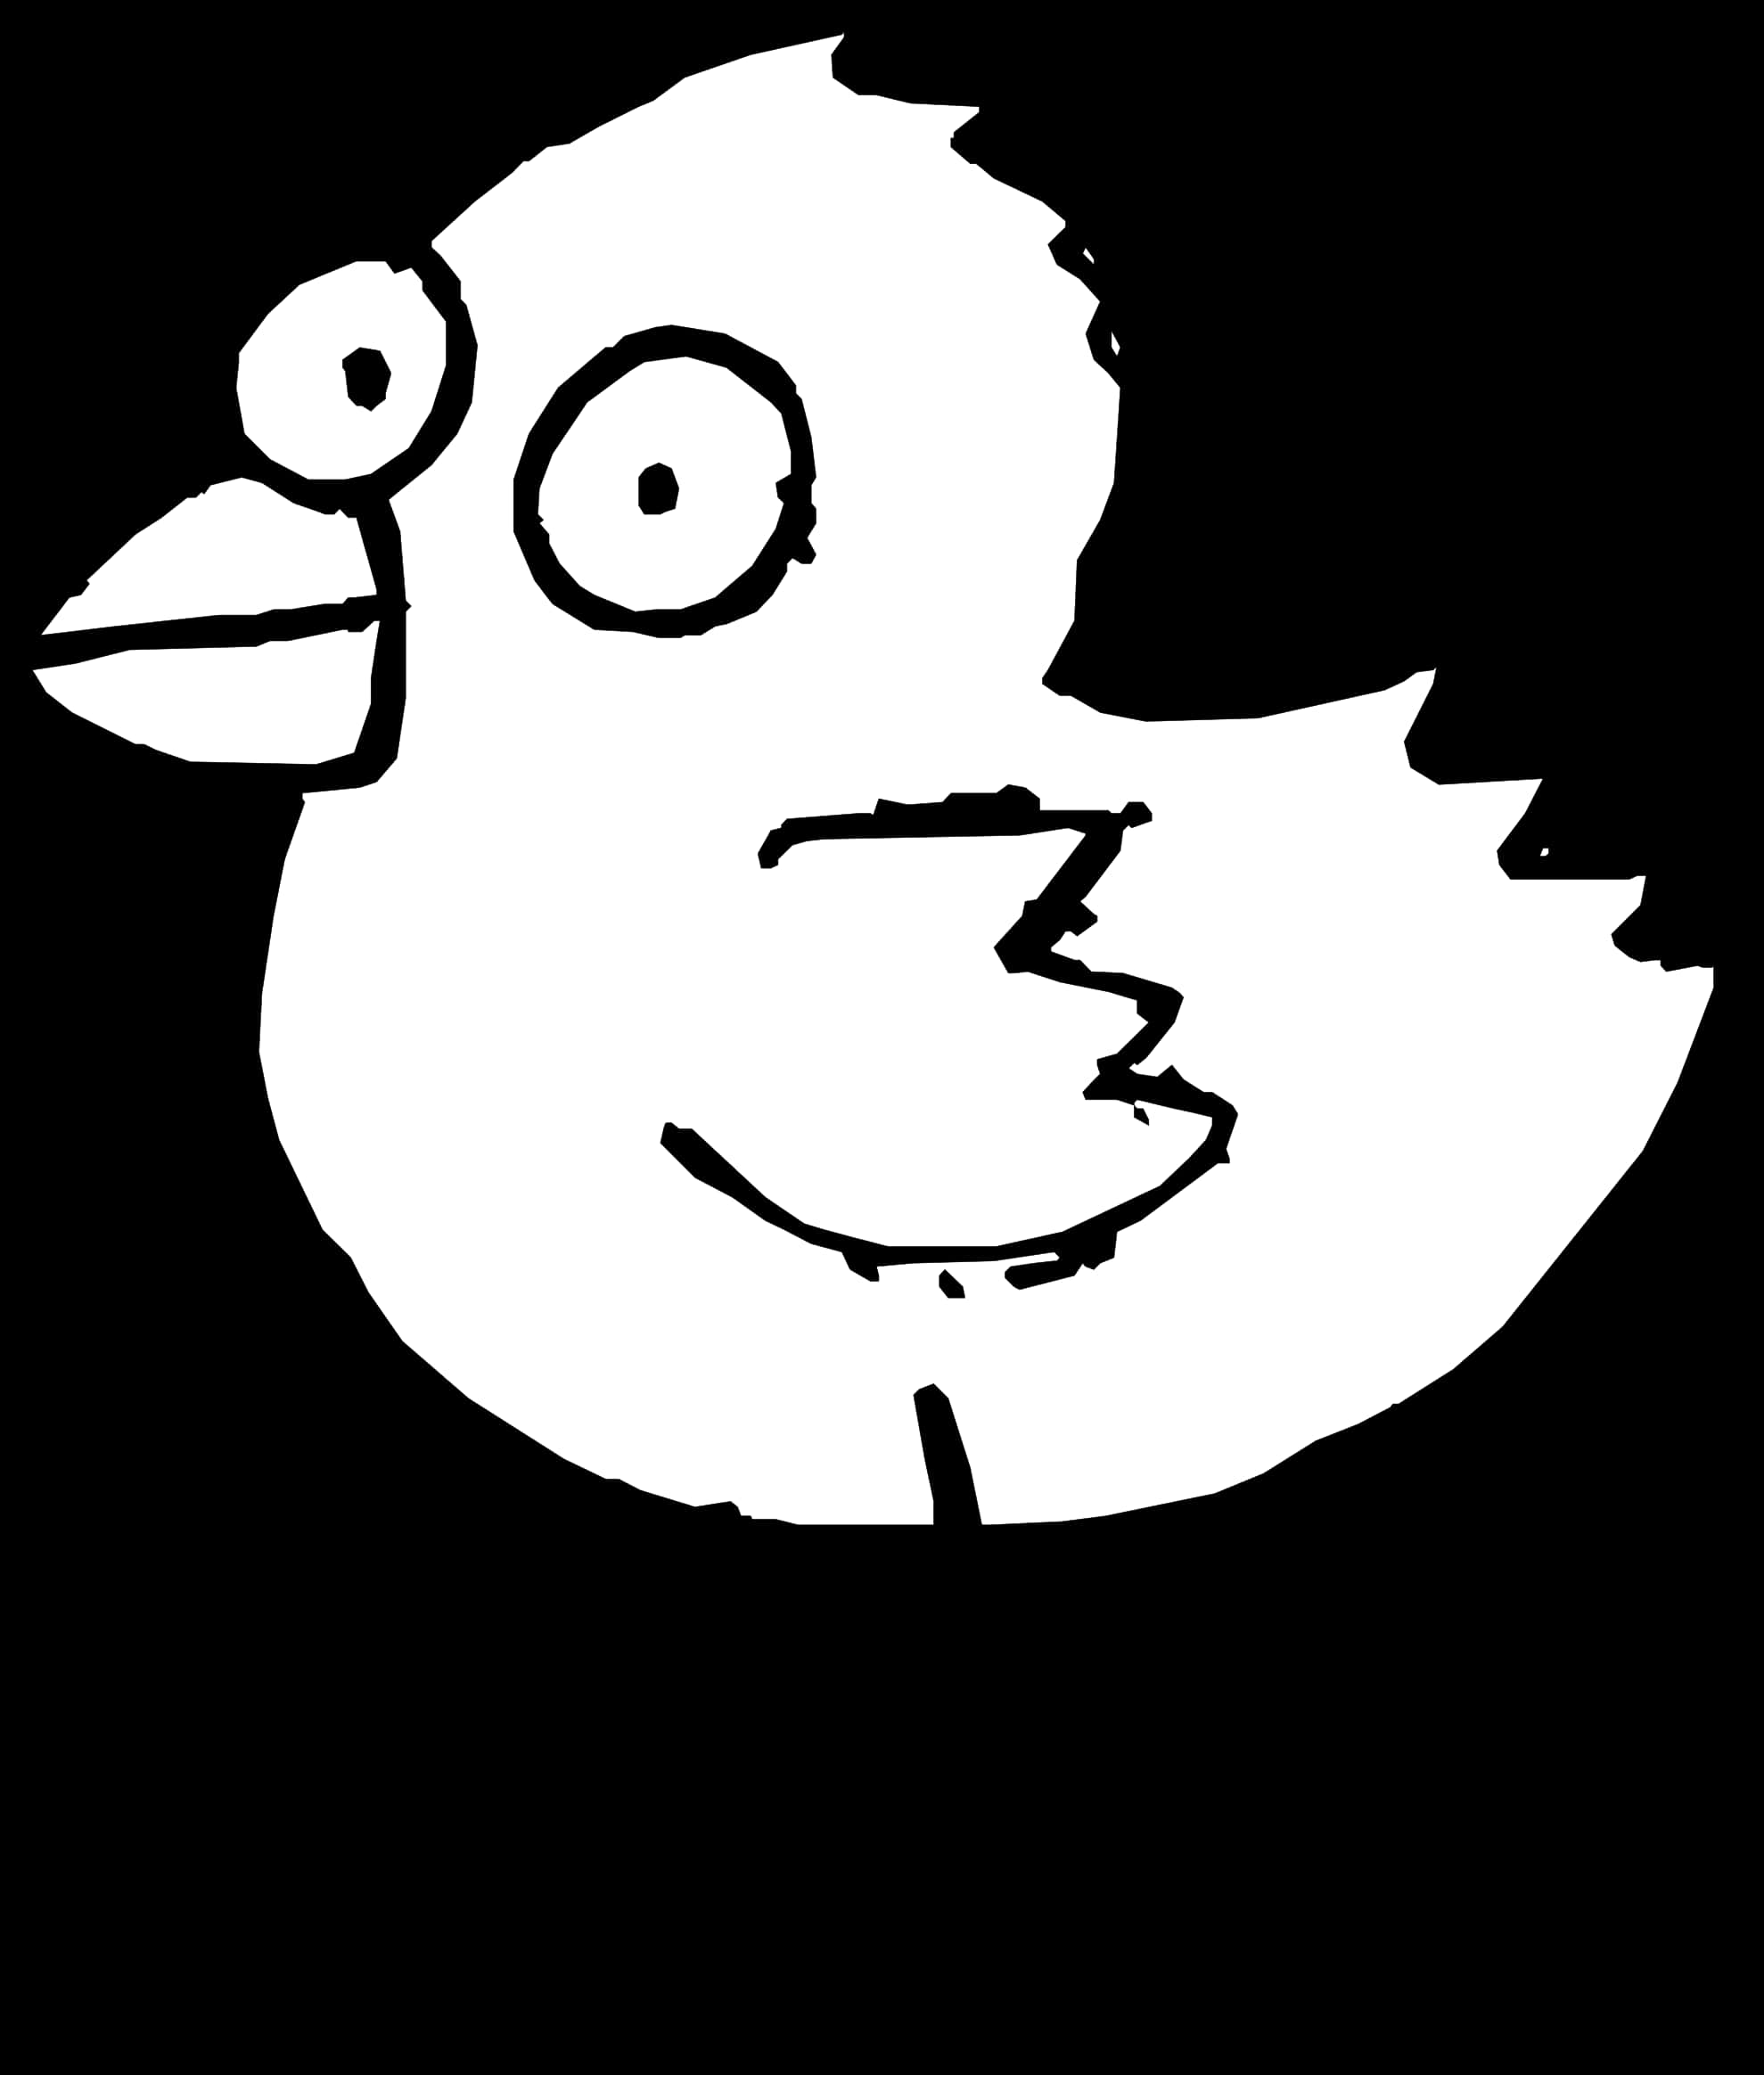 Simplified Dove Drawing